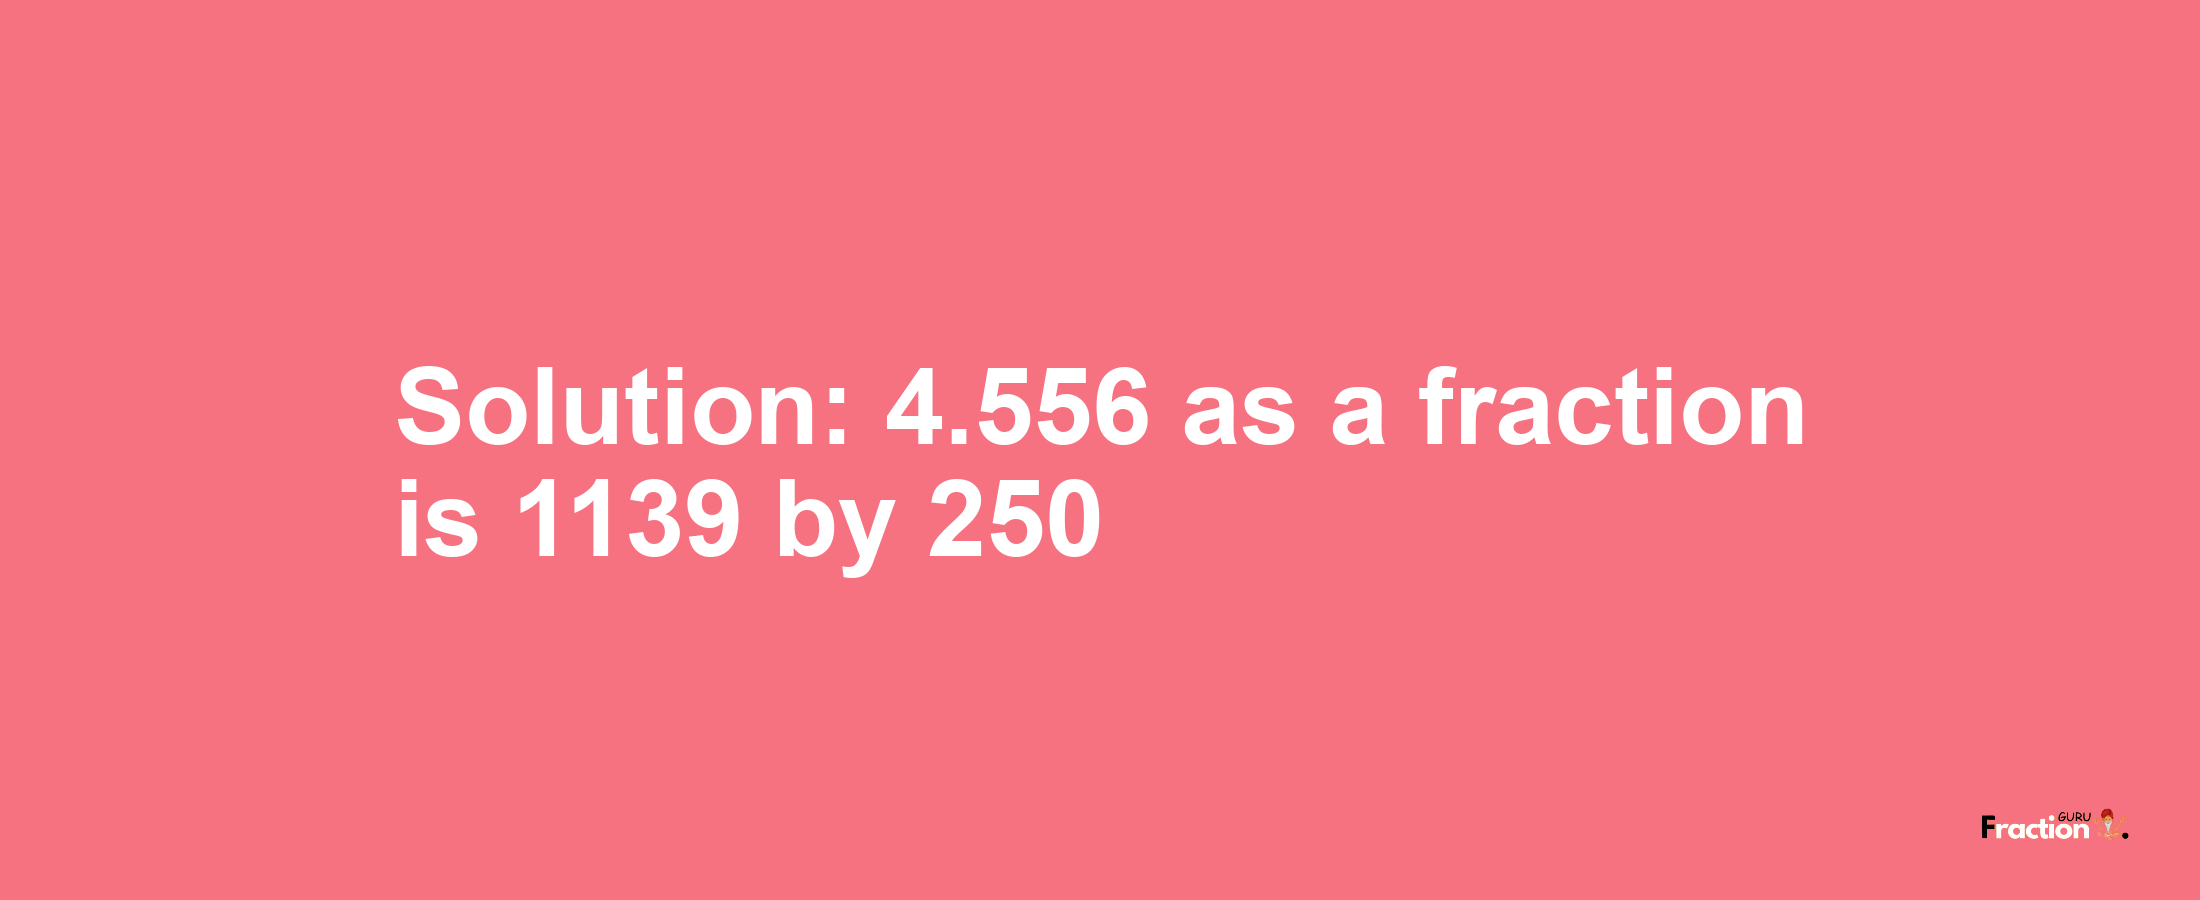 Solution:4.556 as a fraction is 1139/250